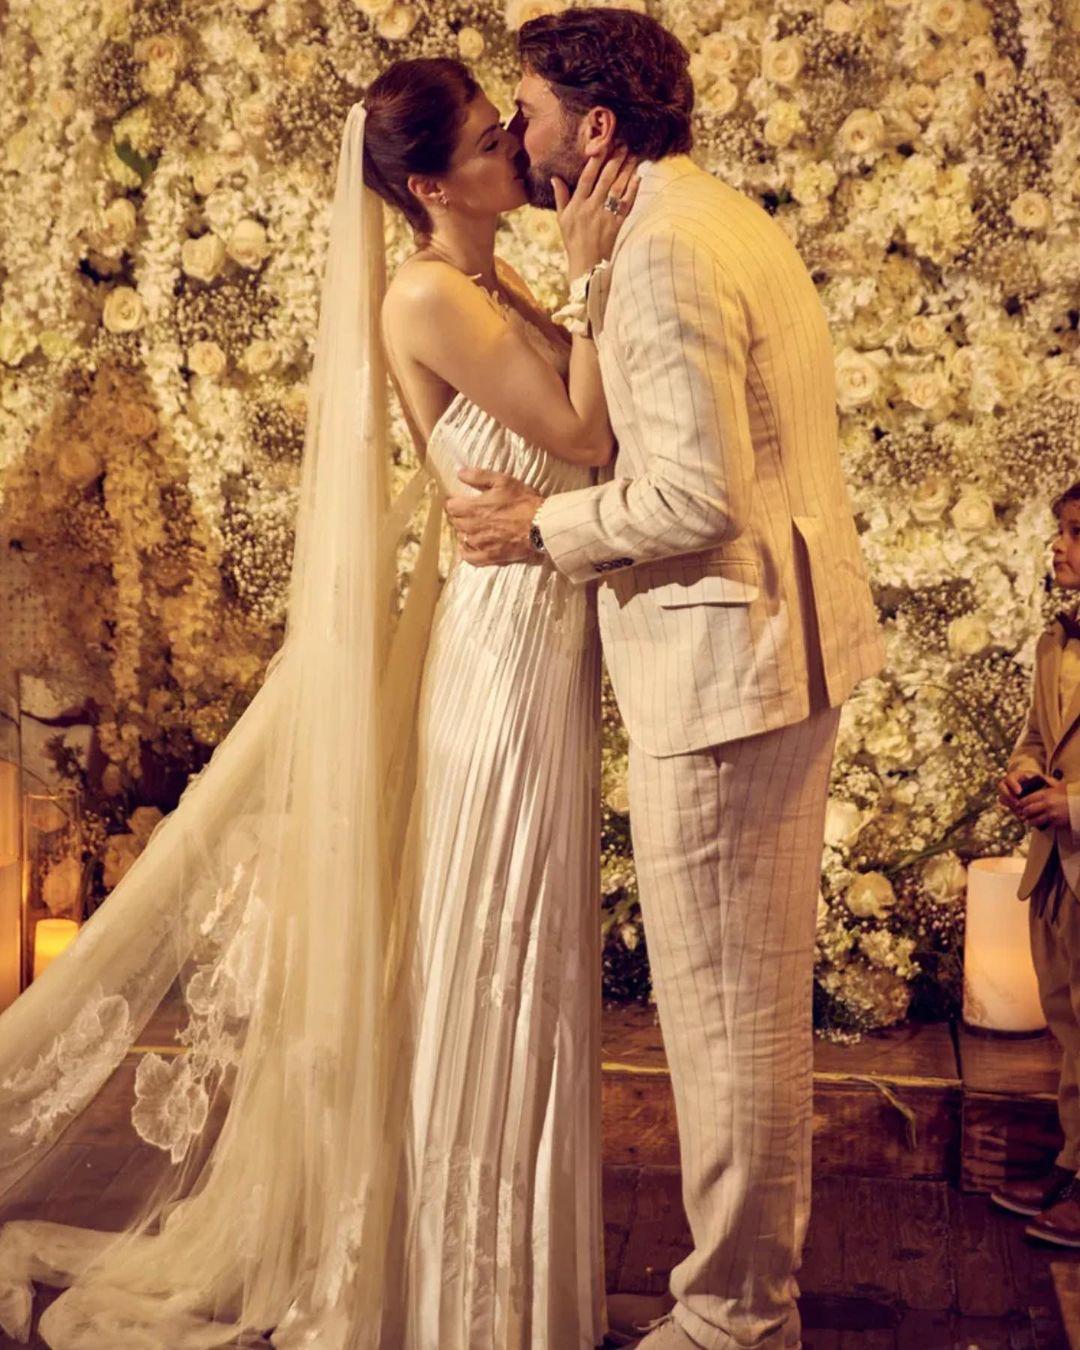 Alexandra Daddario and Andrew Form kiss at their wedding.